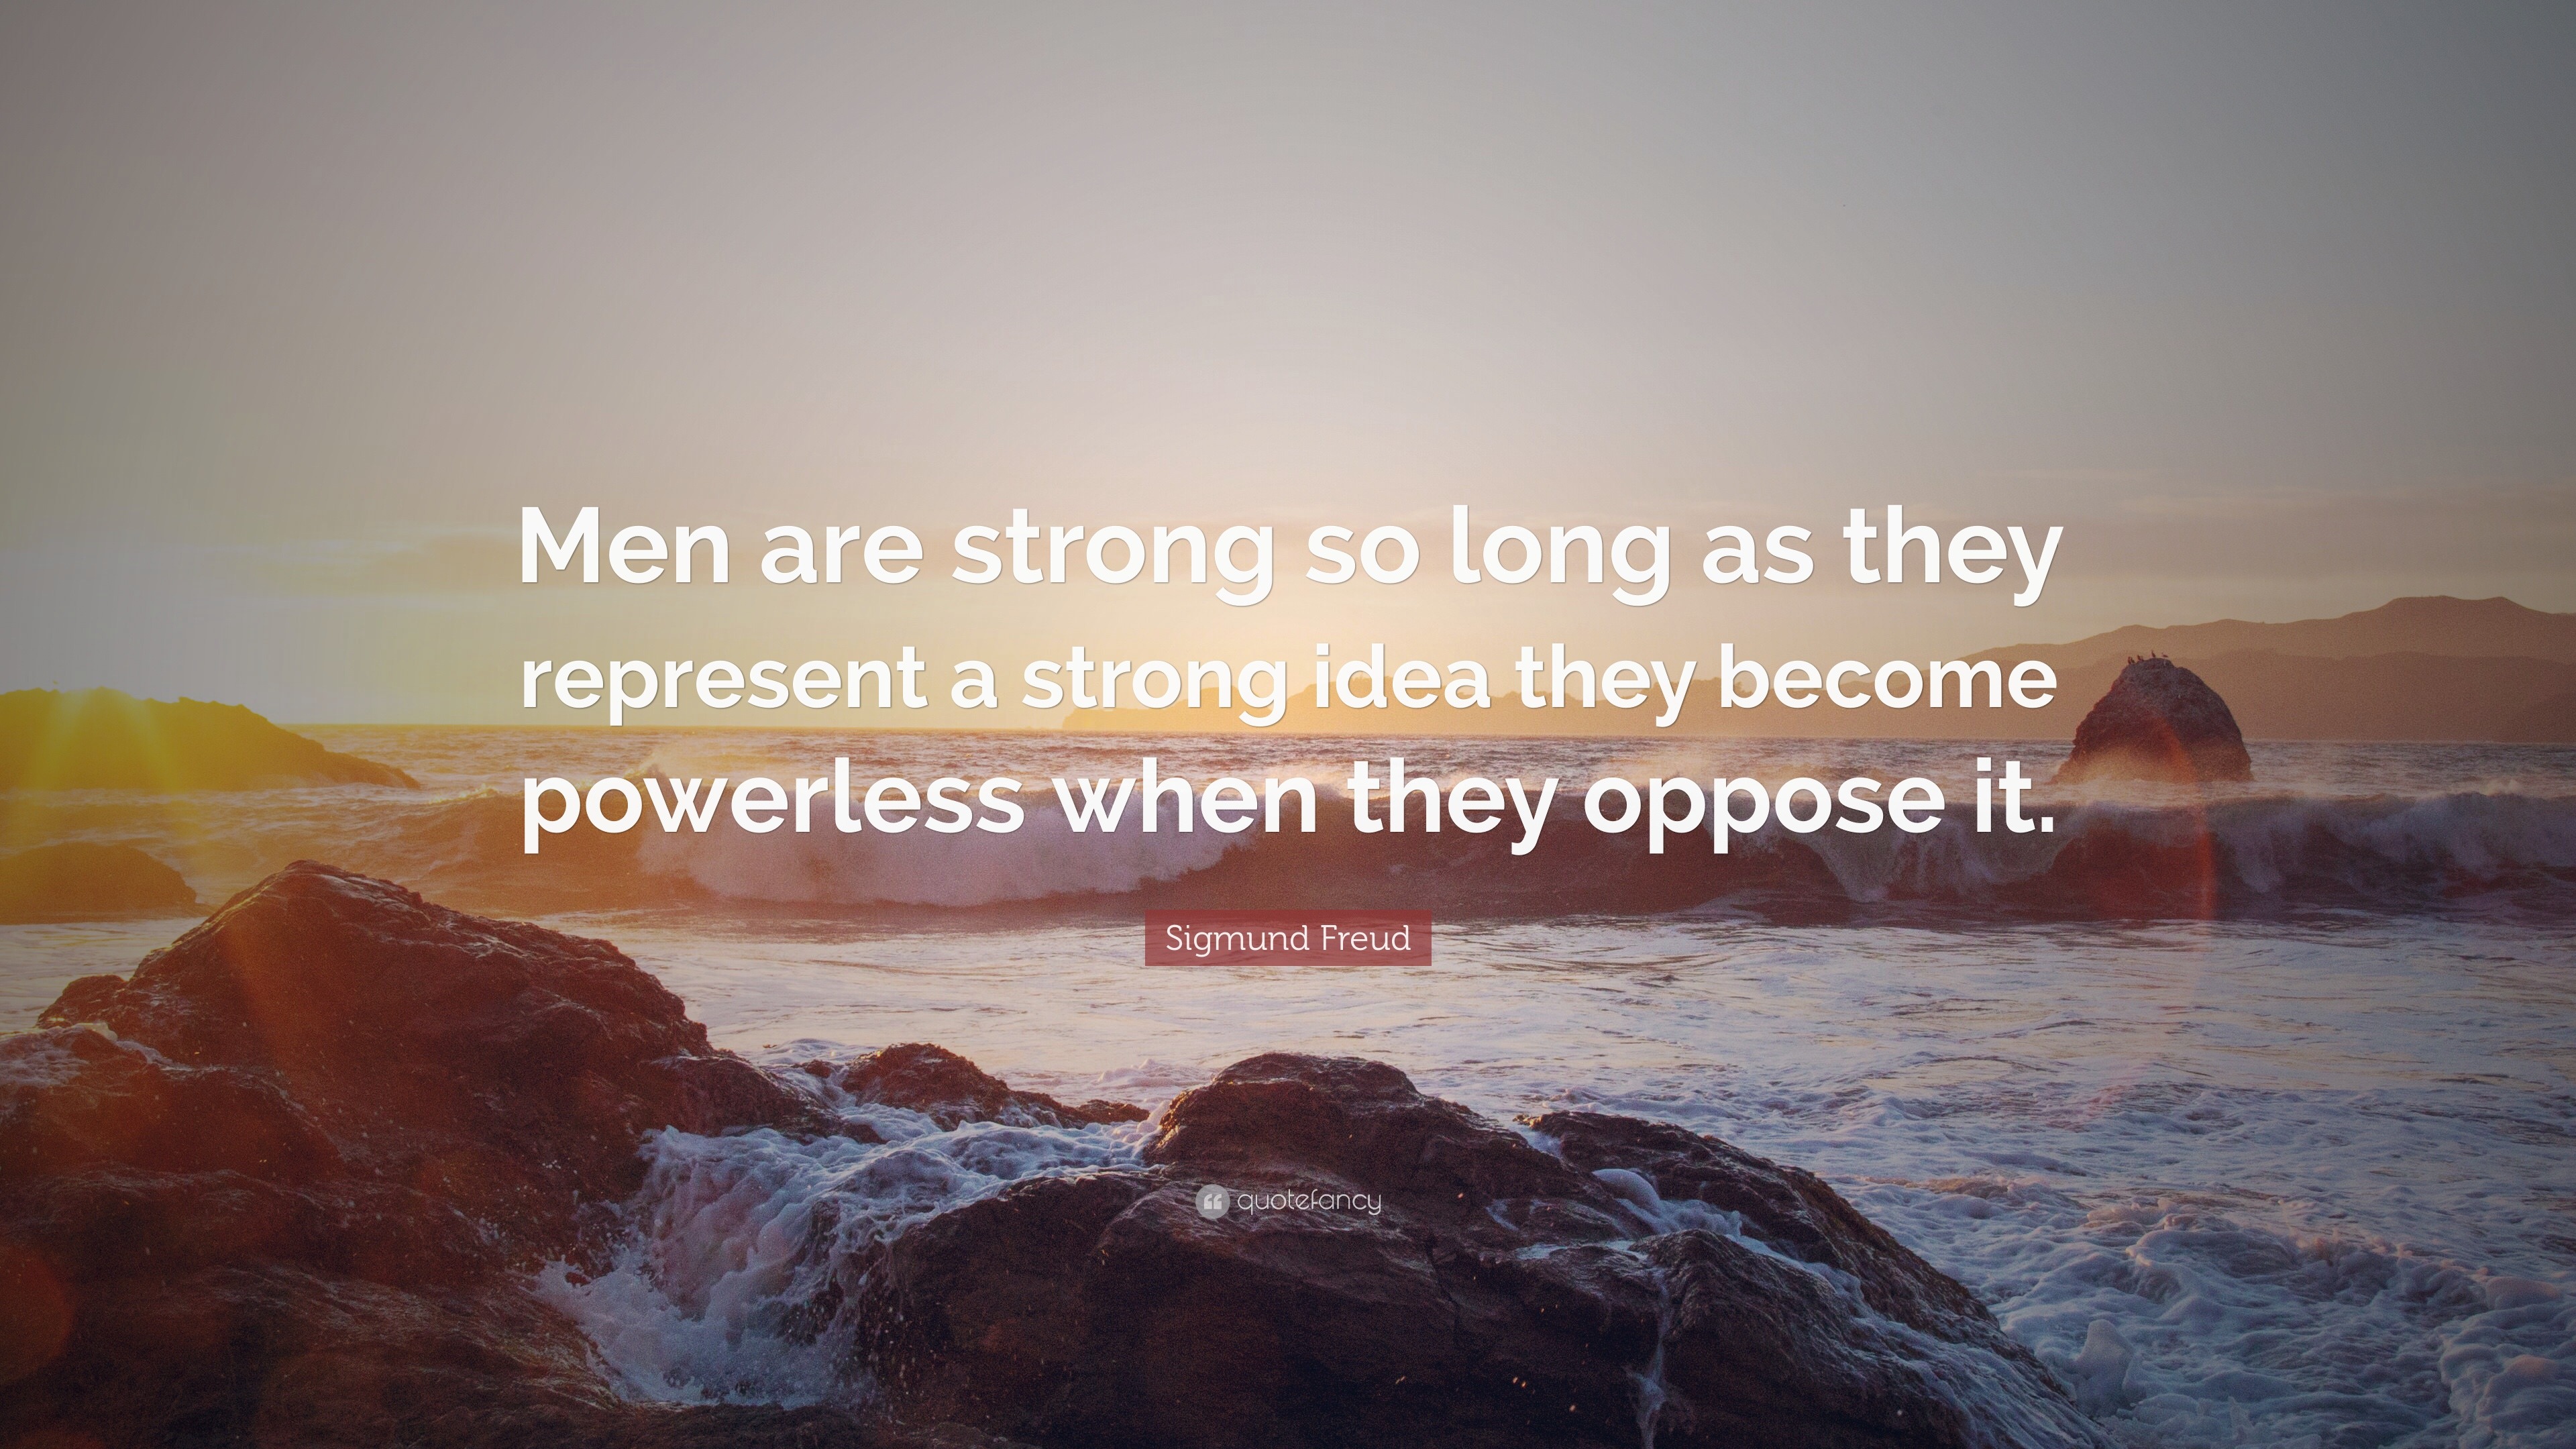 Sigmund Freud Quote: “Men are strong so long as they represent a strong ...